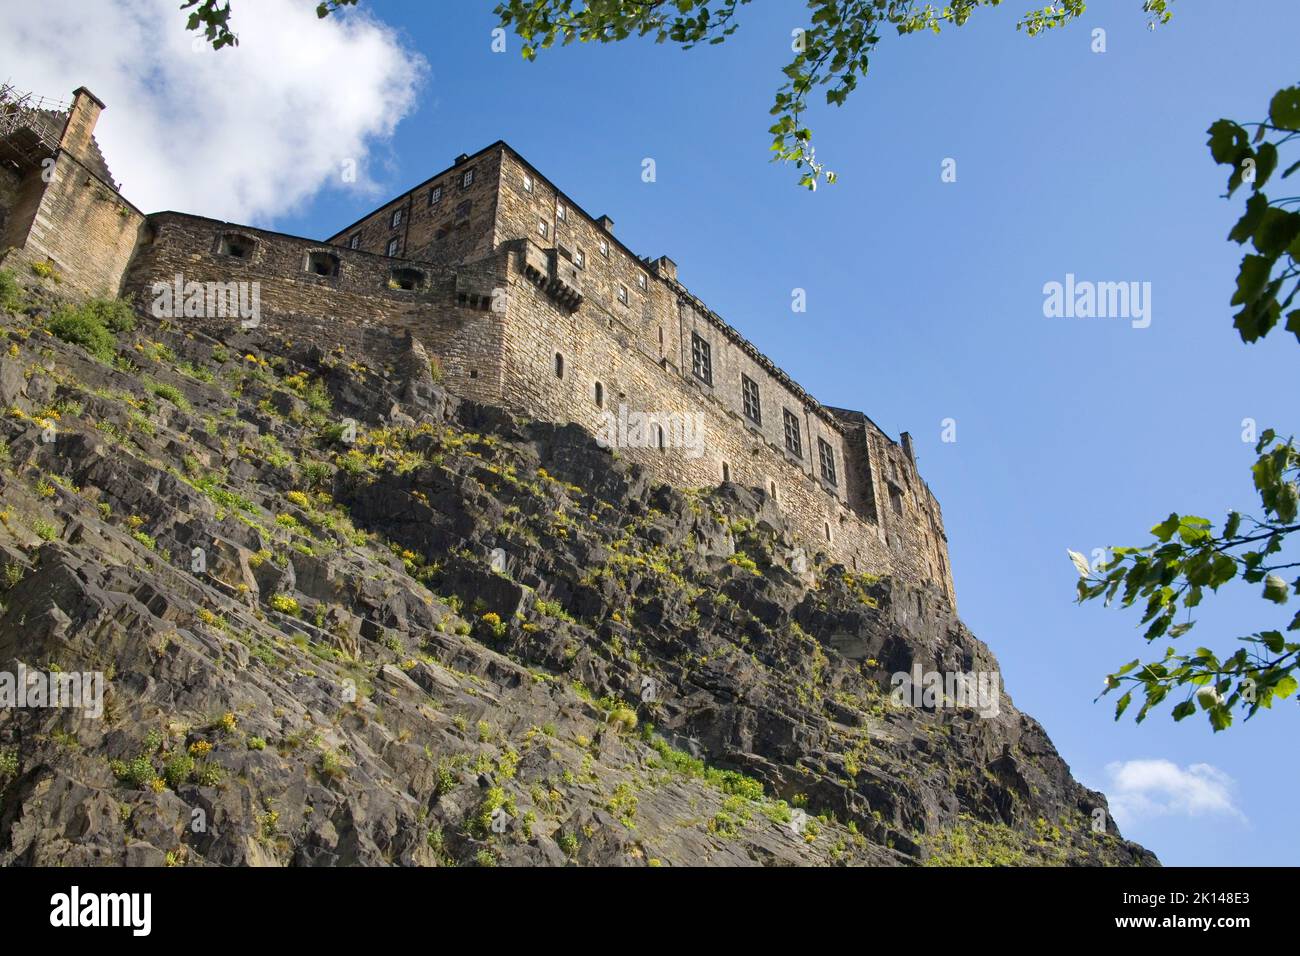 edinburgh castle perched high above the city on a granite cliff Stock Photo